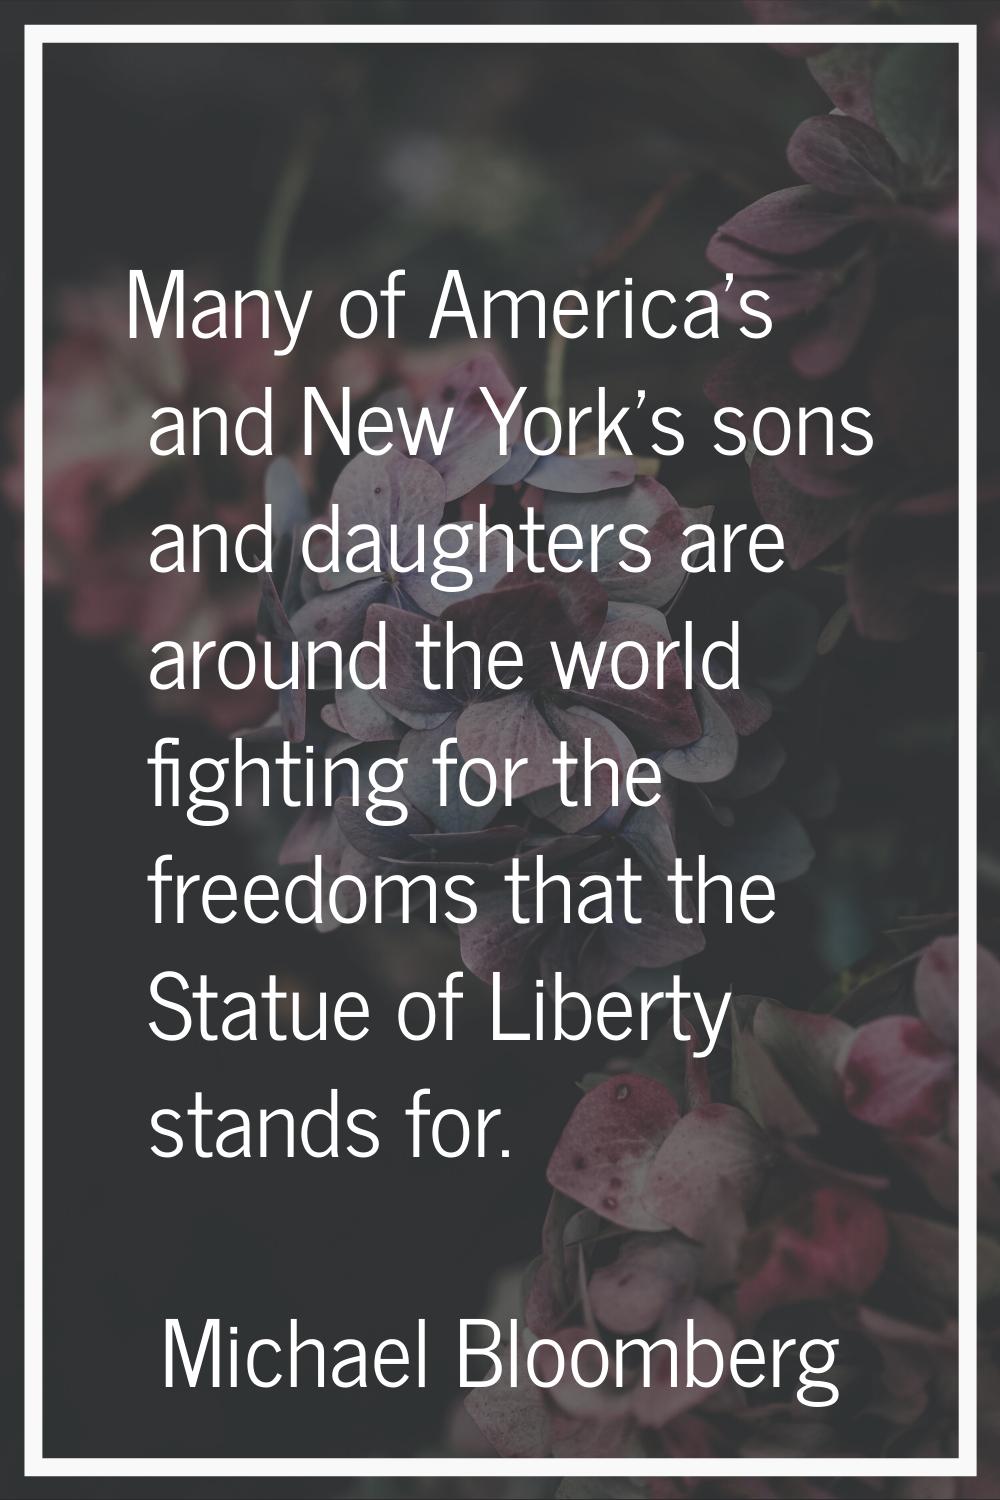 Many of America's and New York's sons and daughters are around the world fighting for the freedoms 